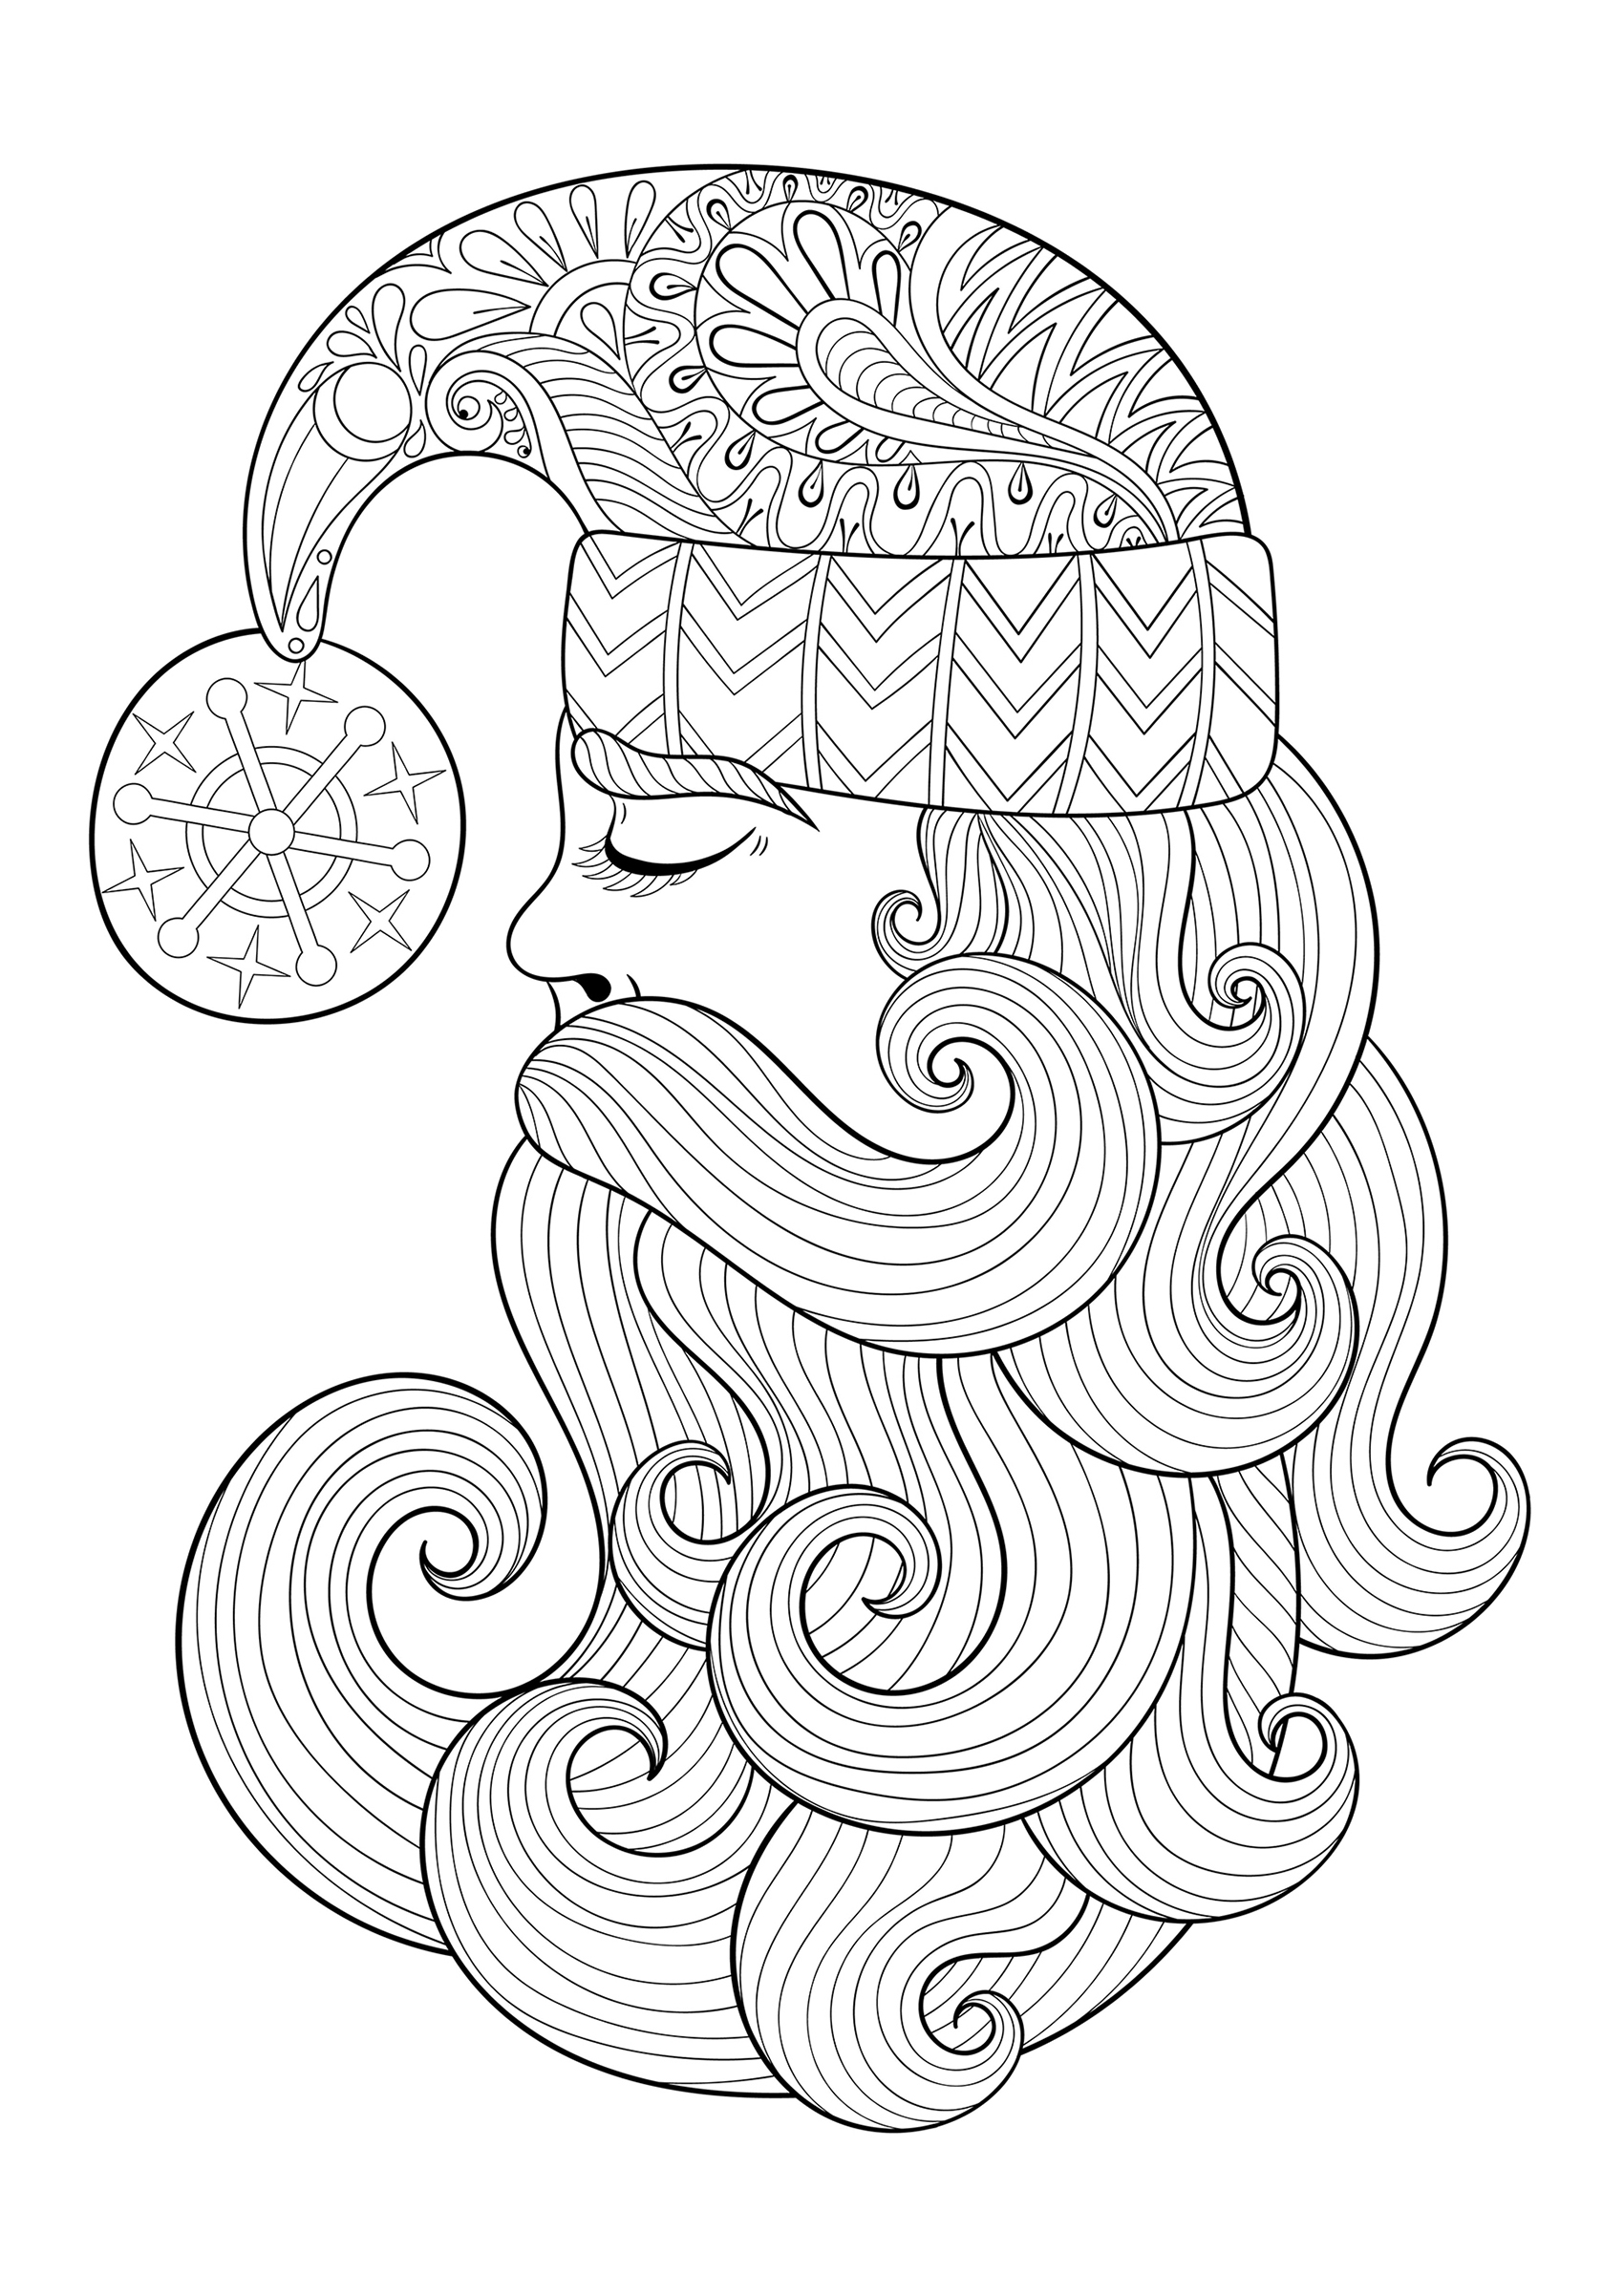 Coloring page of Santa Claus seen in profile, looking like the moon, Source : 123rf   Artist : Ipanki